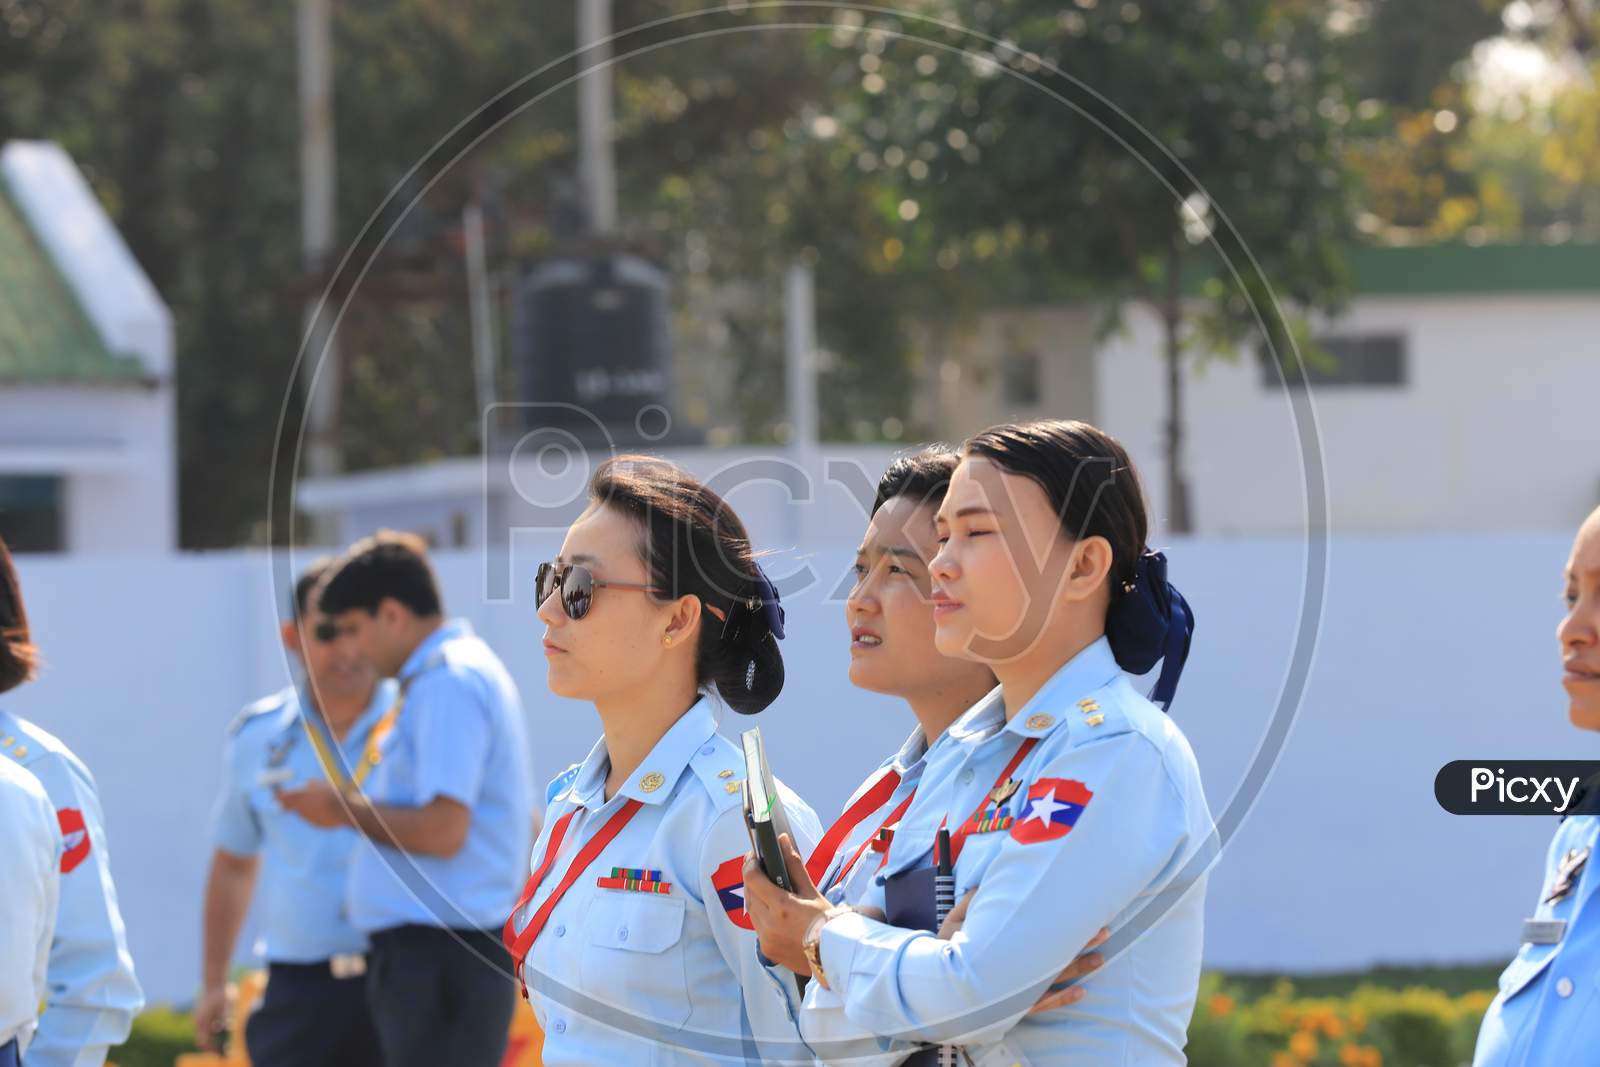 Indian Air Force Woman Officers At an Air Base